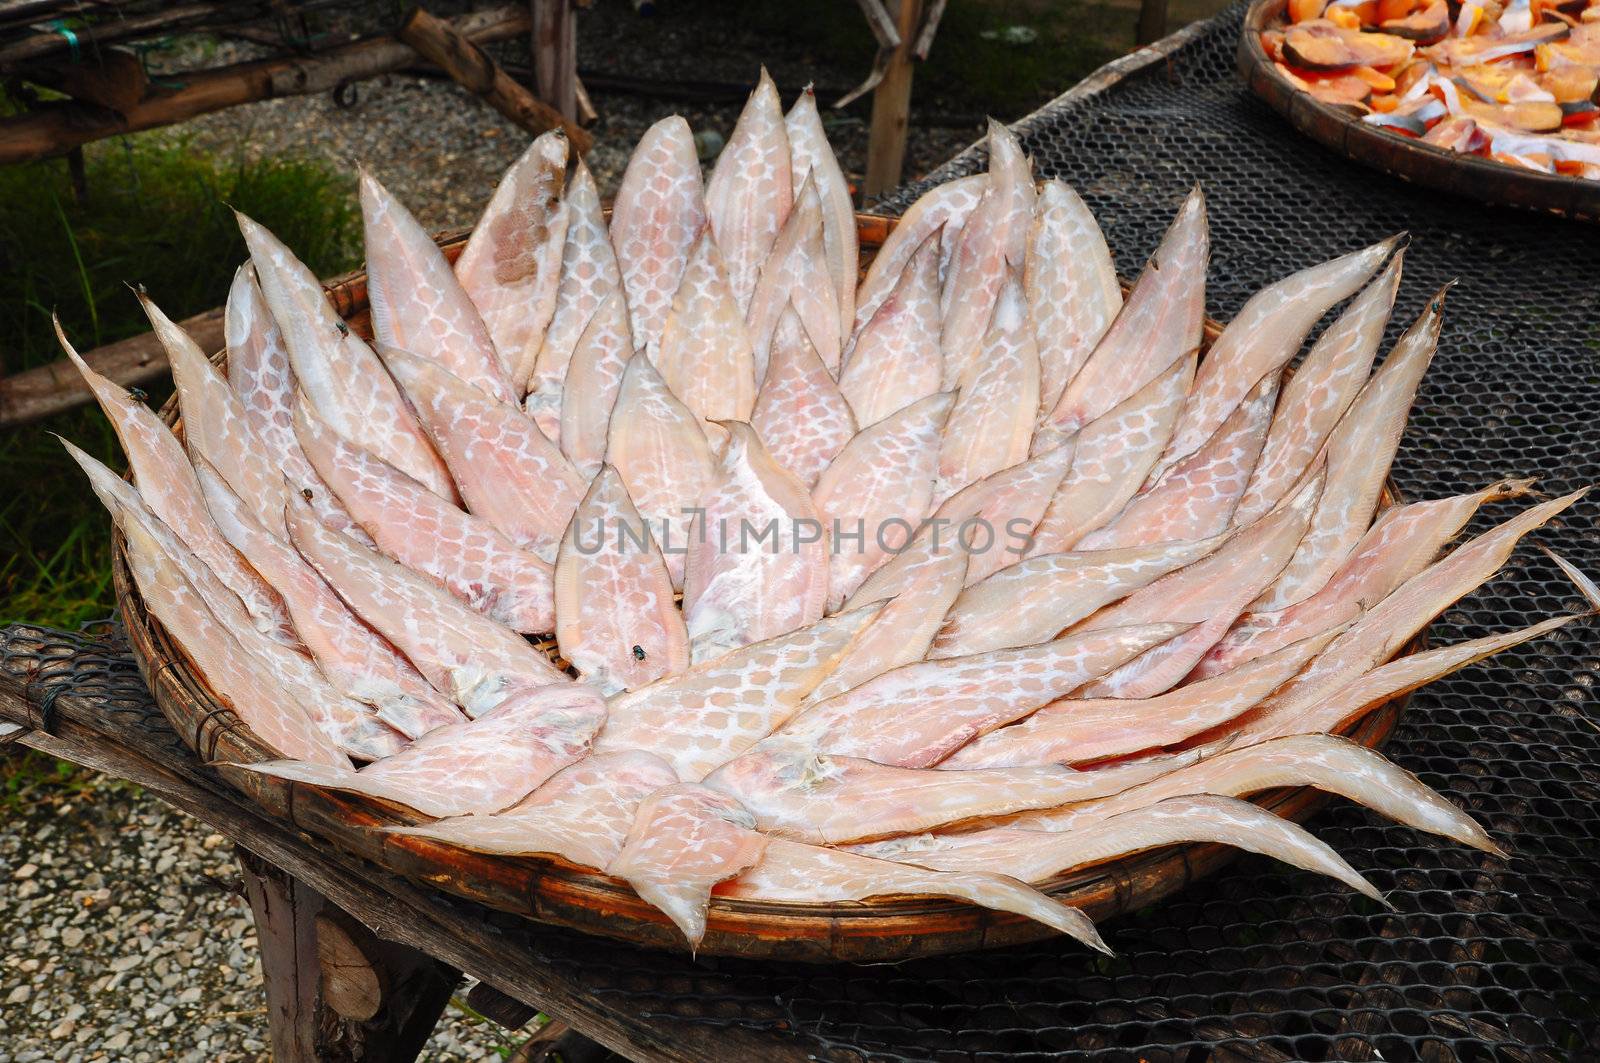 Dried fish on the basket